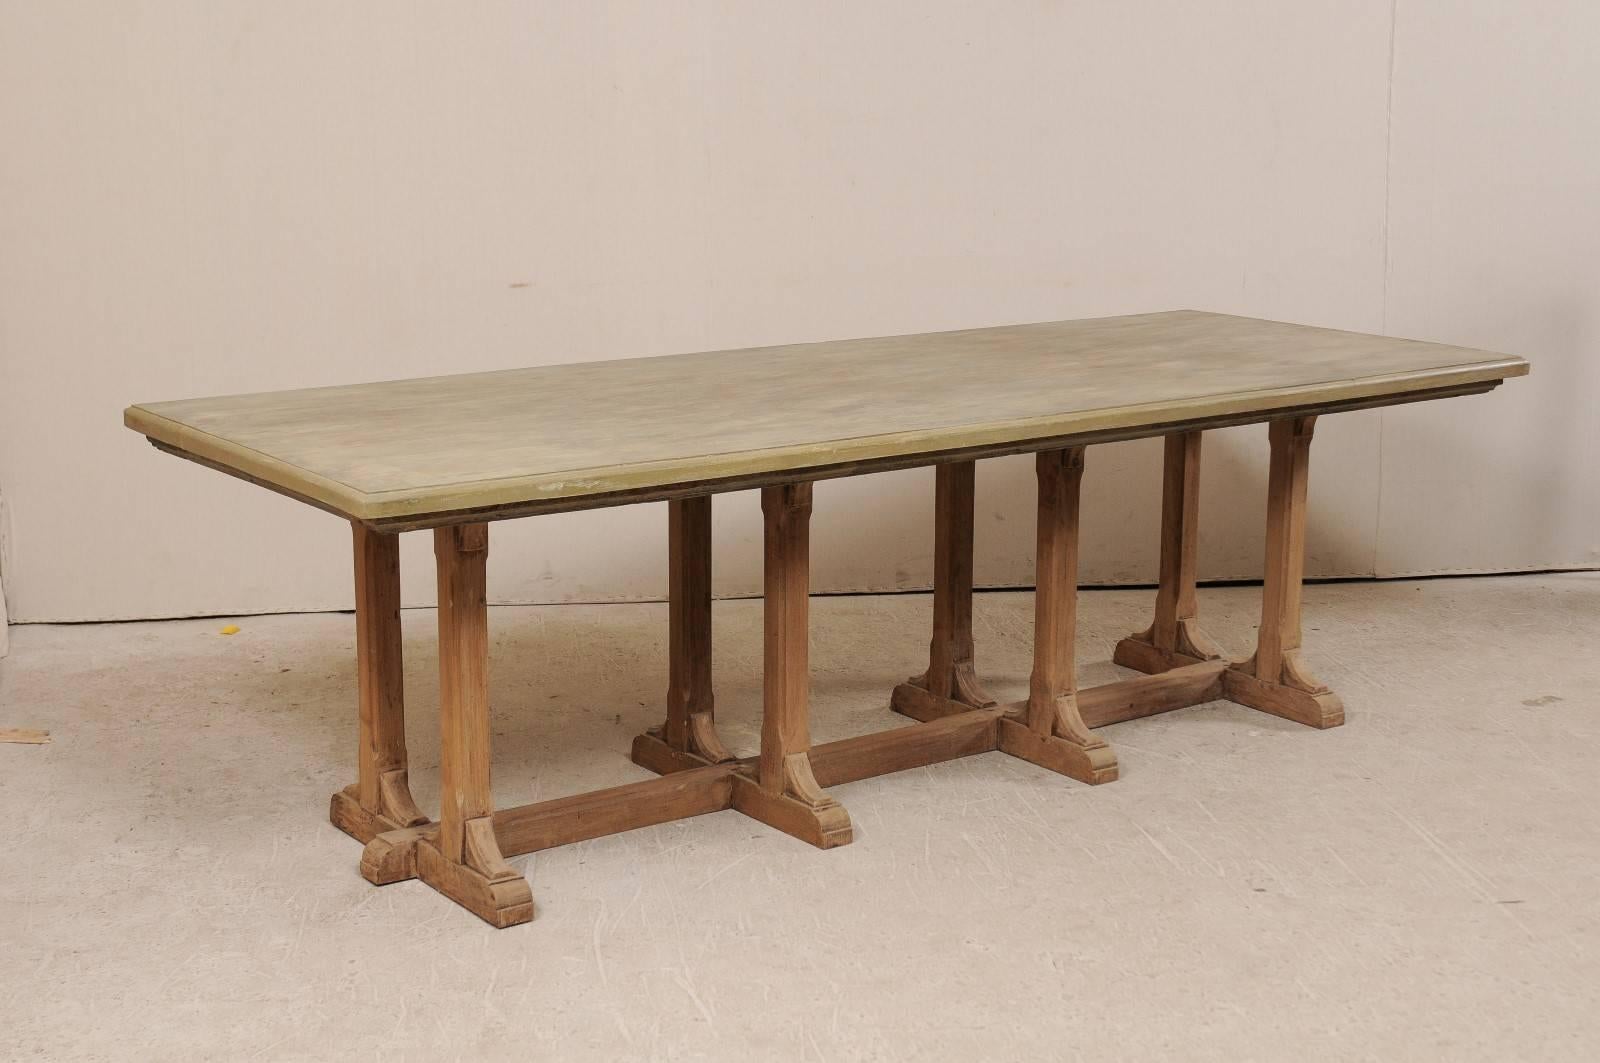 A vintage American trestle dining table. This American made eight-legged dining table features a trestle base which been constructed of old Indian teak wood. The long, rectangular shaped wood top has a light wash of grey, green, cream and blue. The